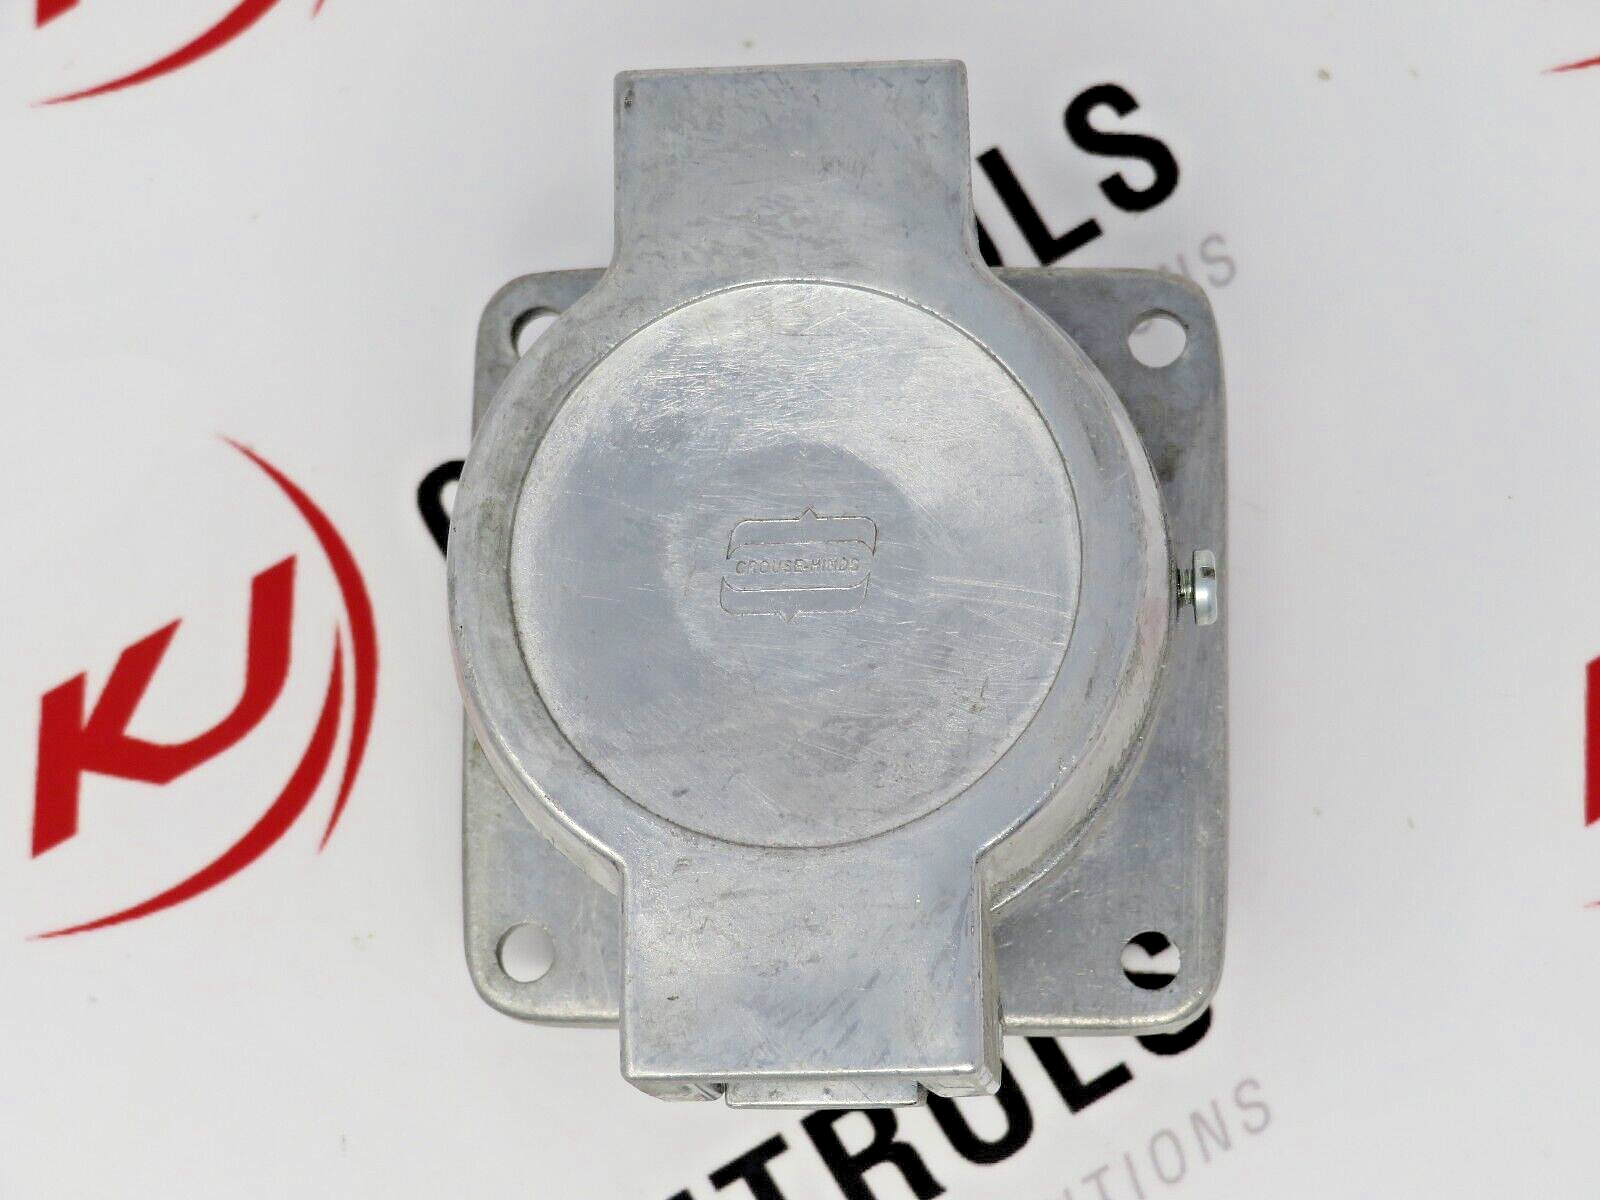 Eaton Crouse-Hinds AR342 M4 Receptacle Body Grounded Type 3R / Rainproof 4-Pole